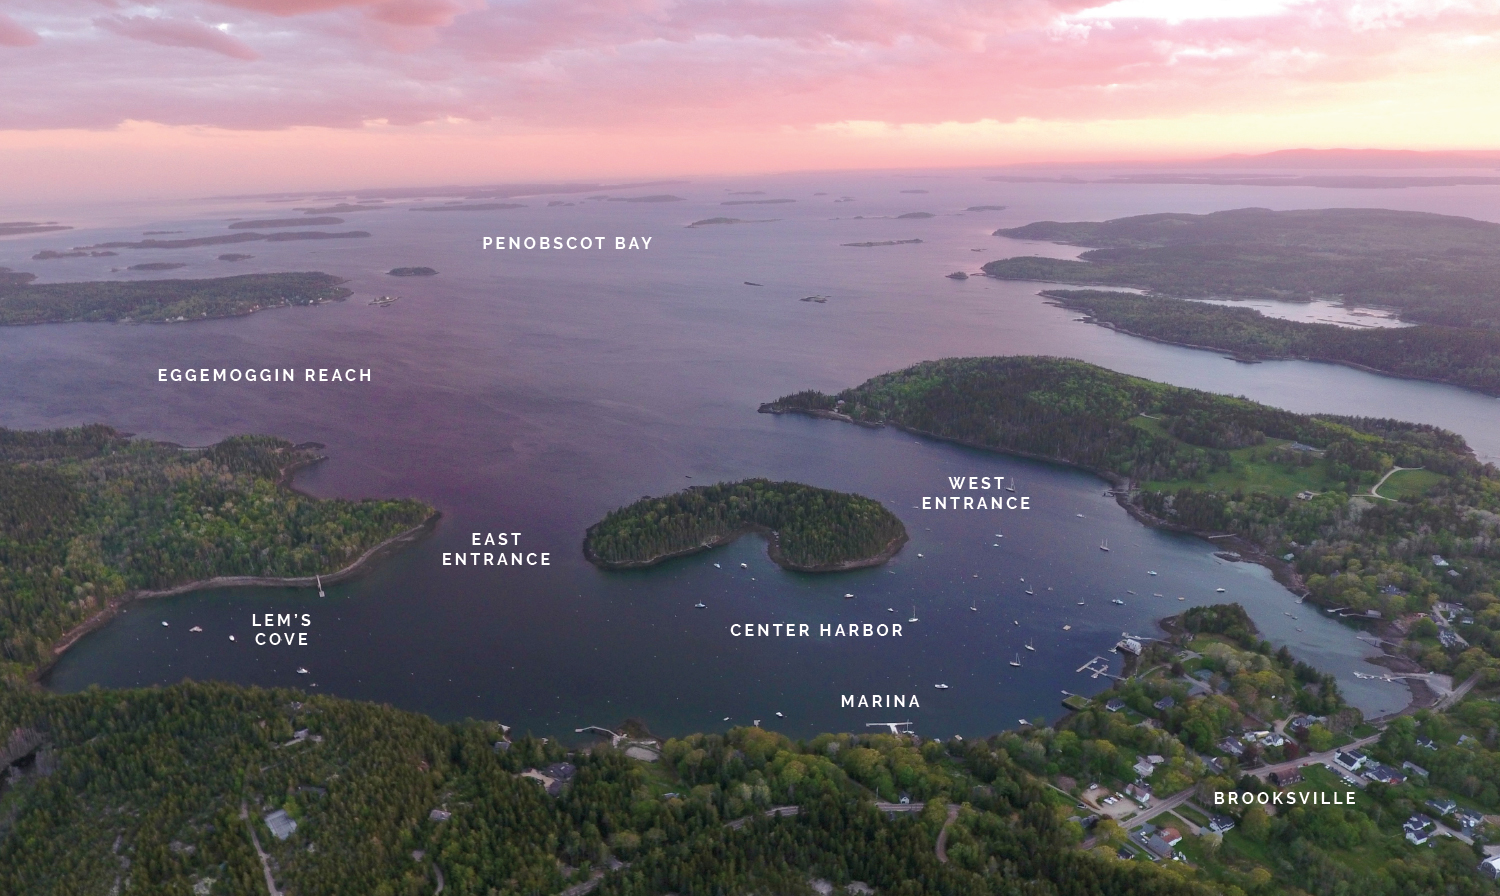 Aerial photograph of Buck's Harbor with text identifying the location of the marina